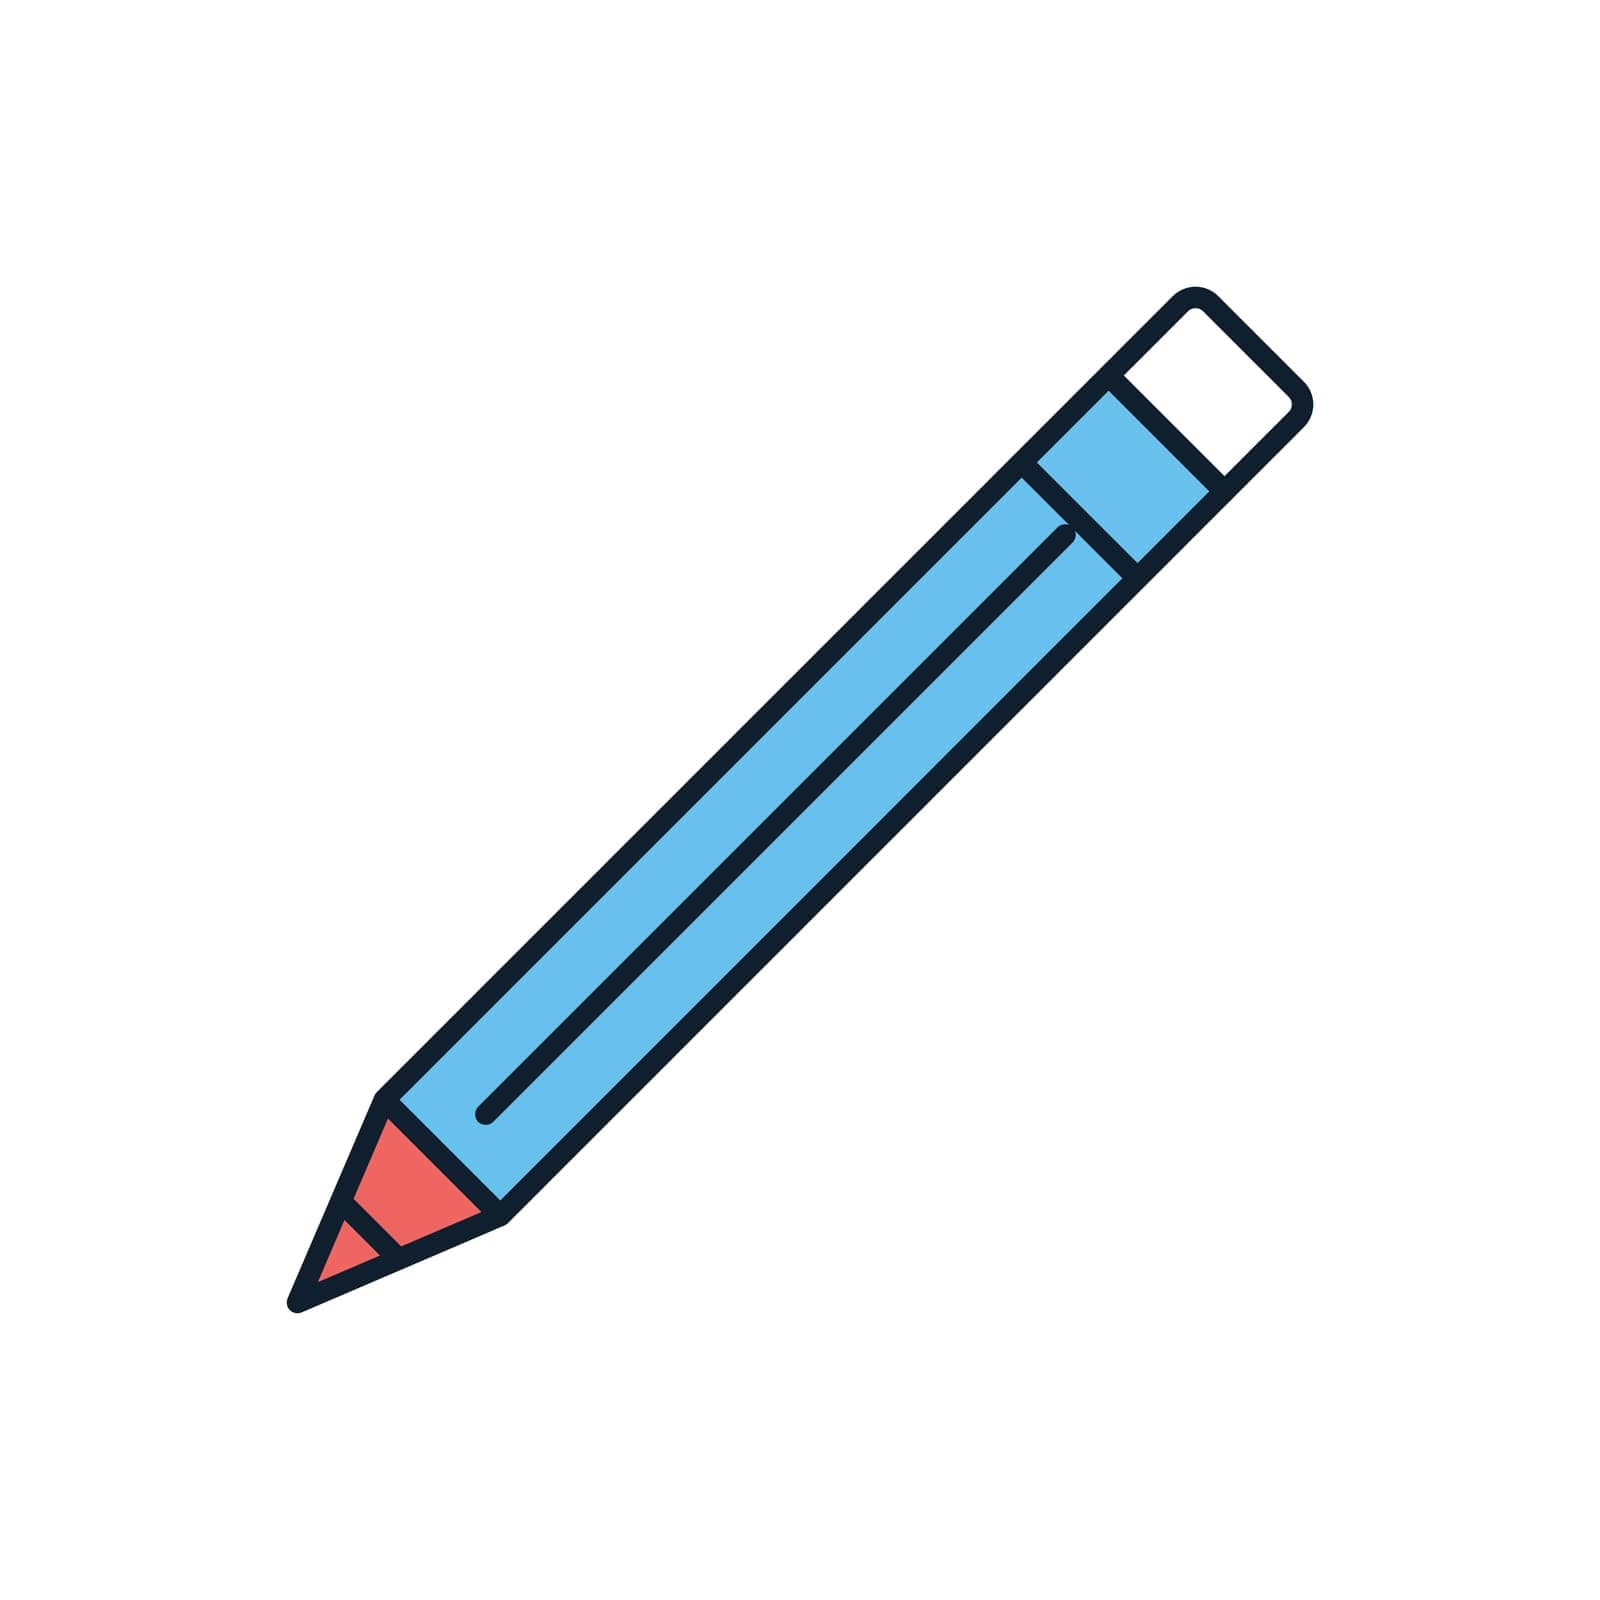 Pencil related vector icon by smoki